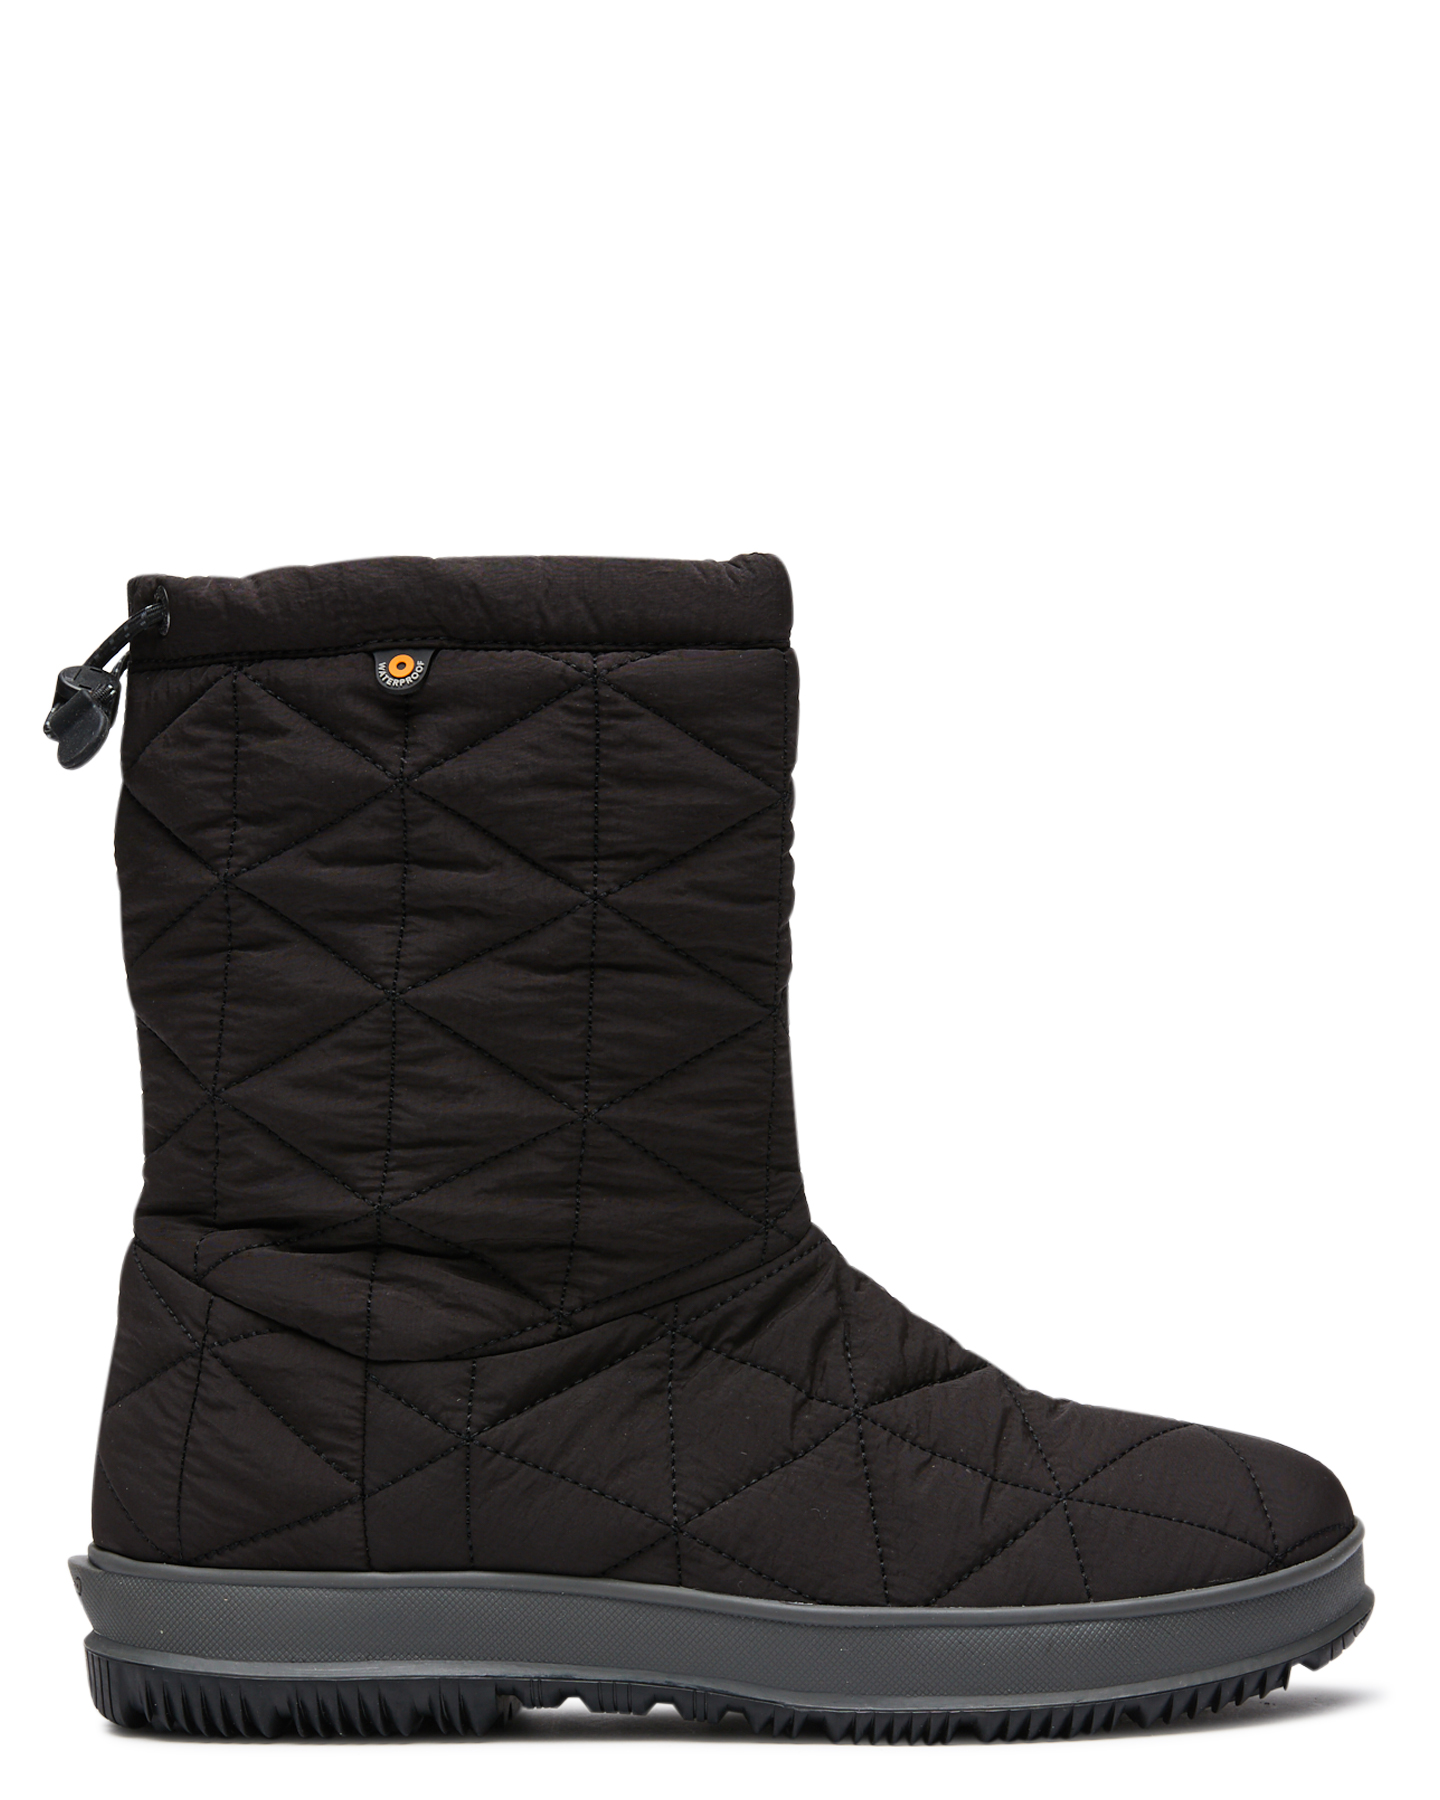 bogs boots womens